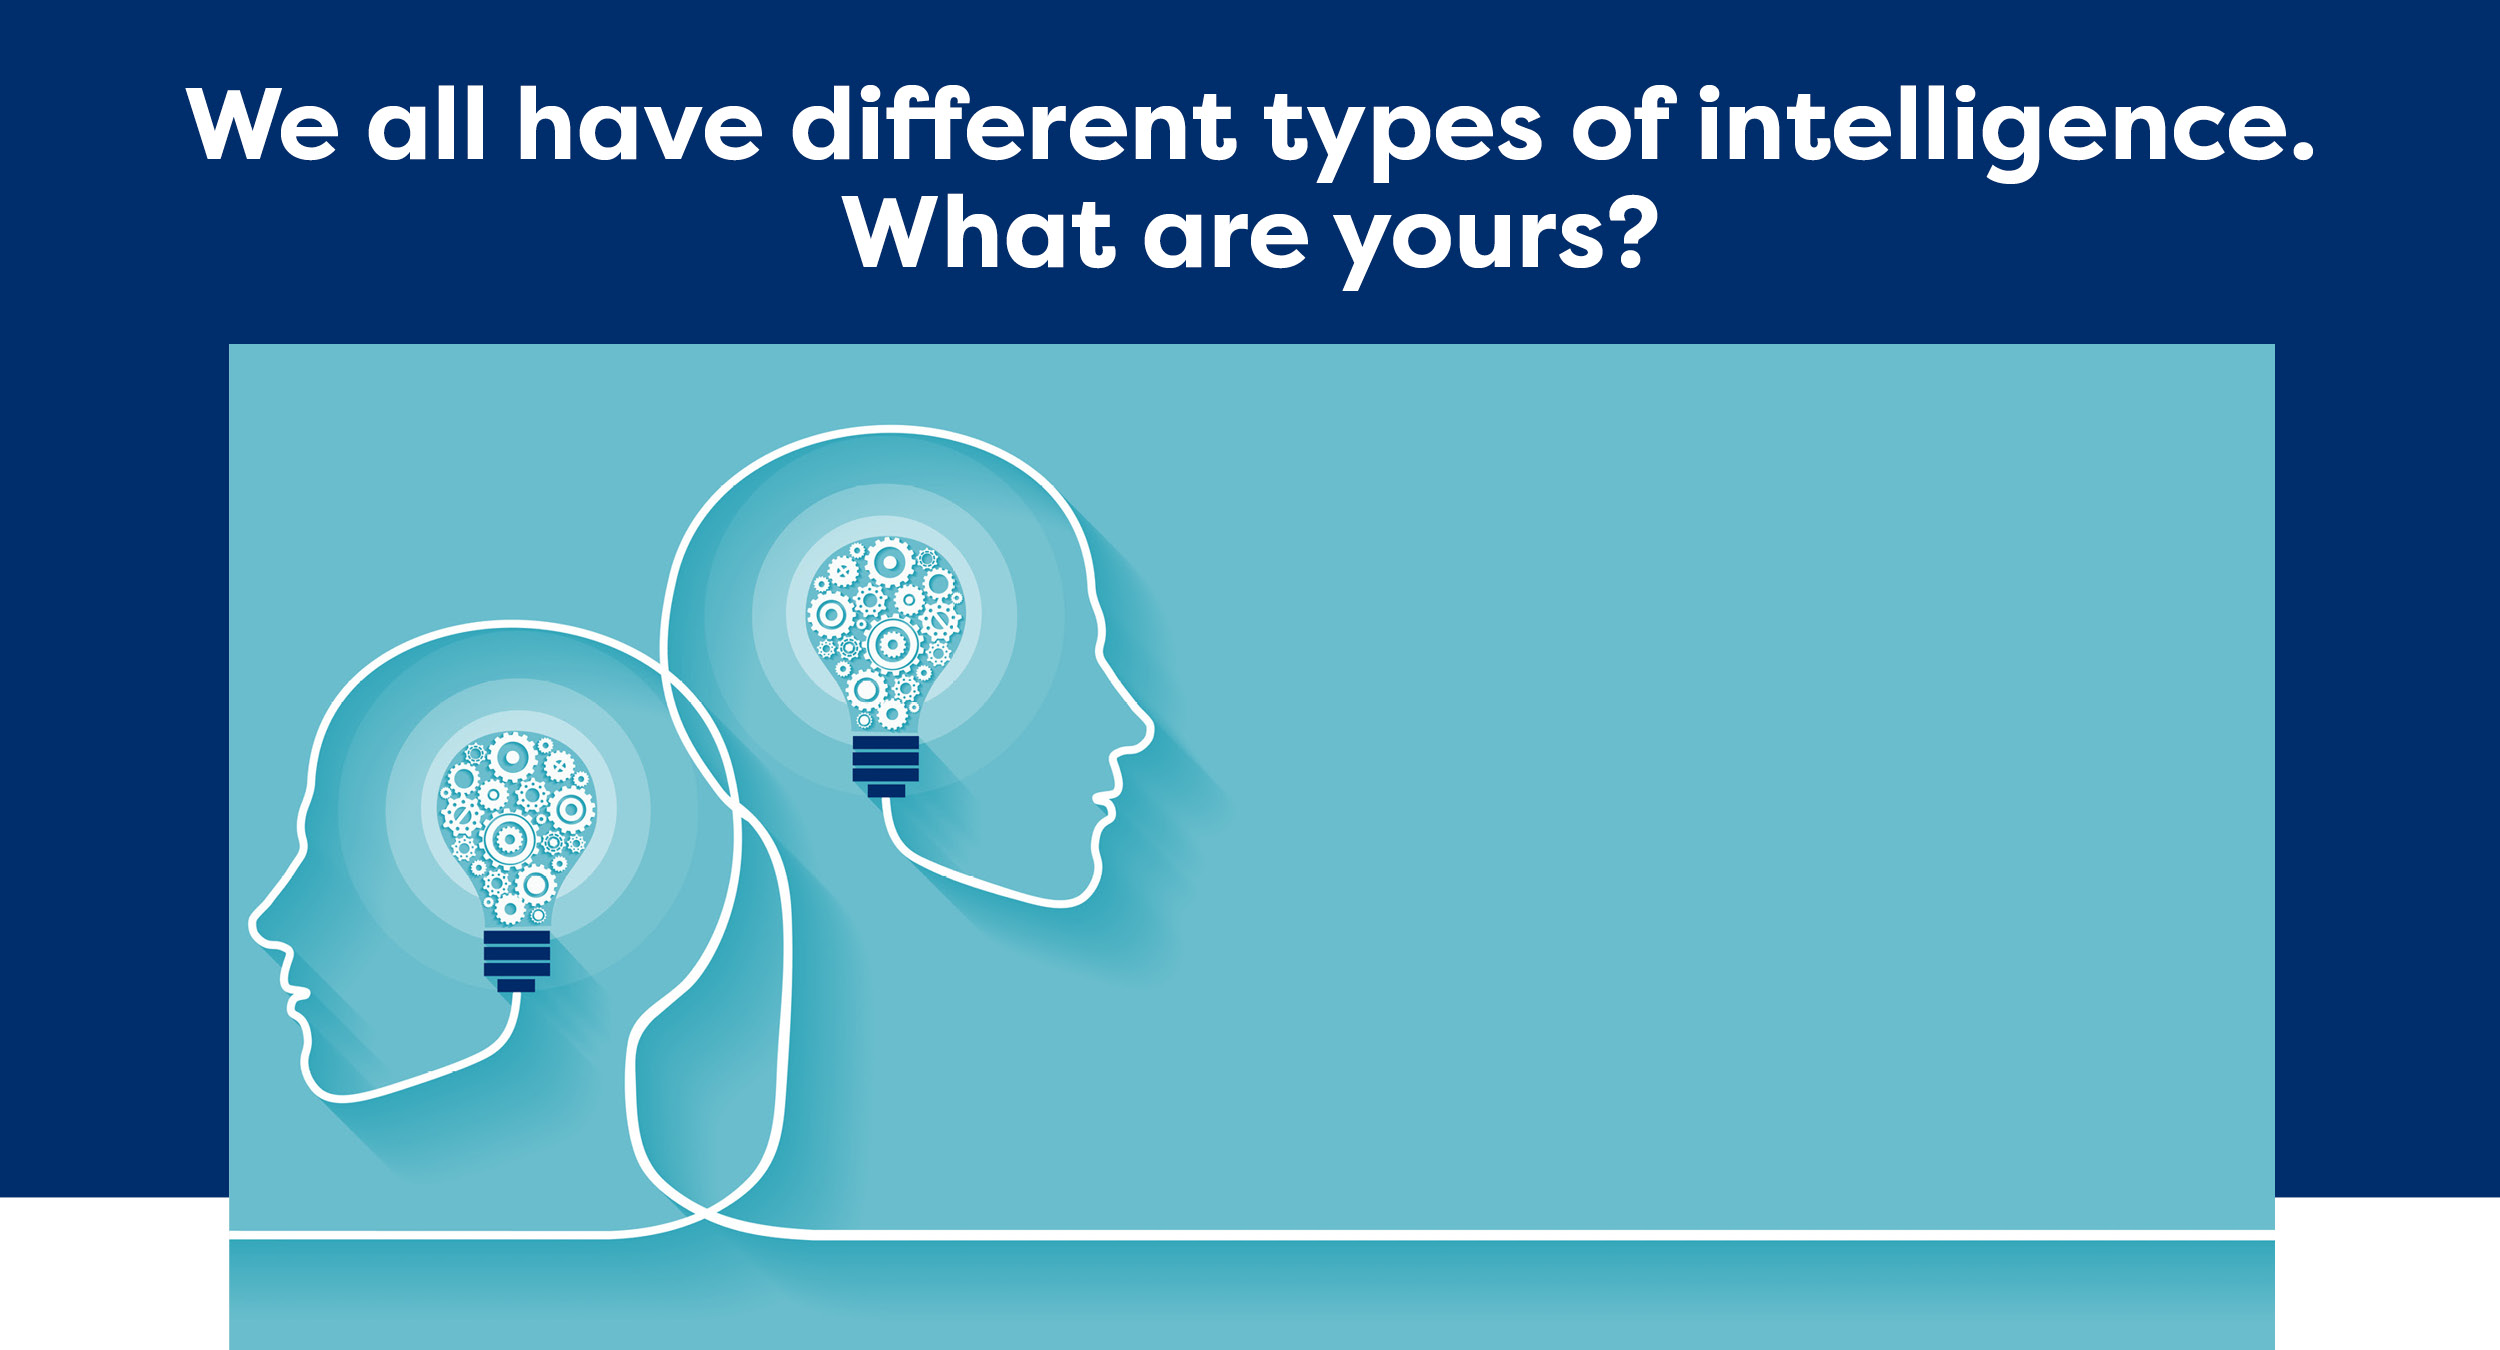 We all have different types of intelligence. What are yours?